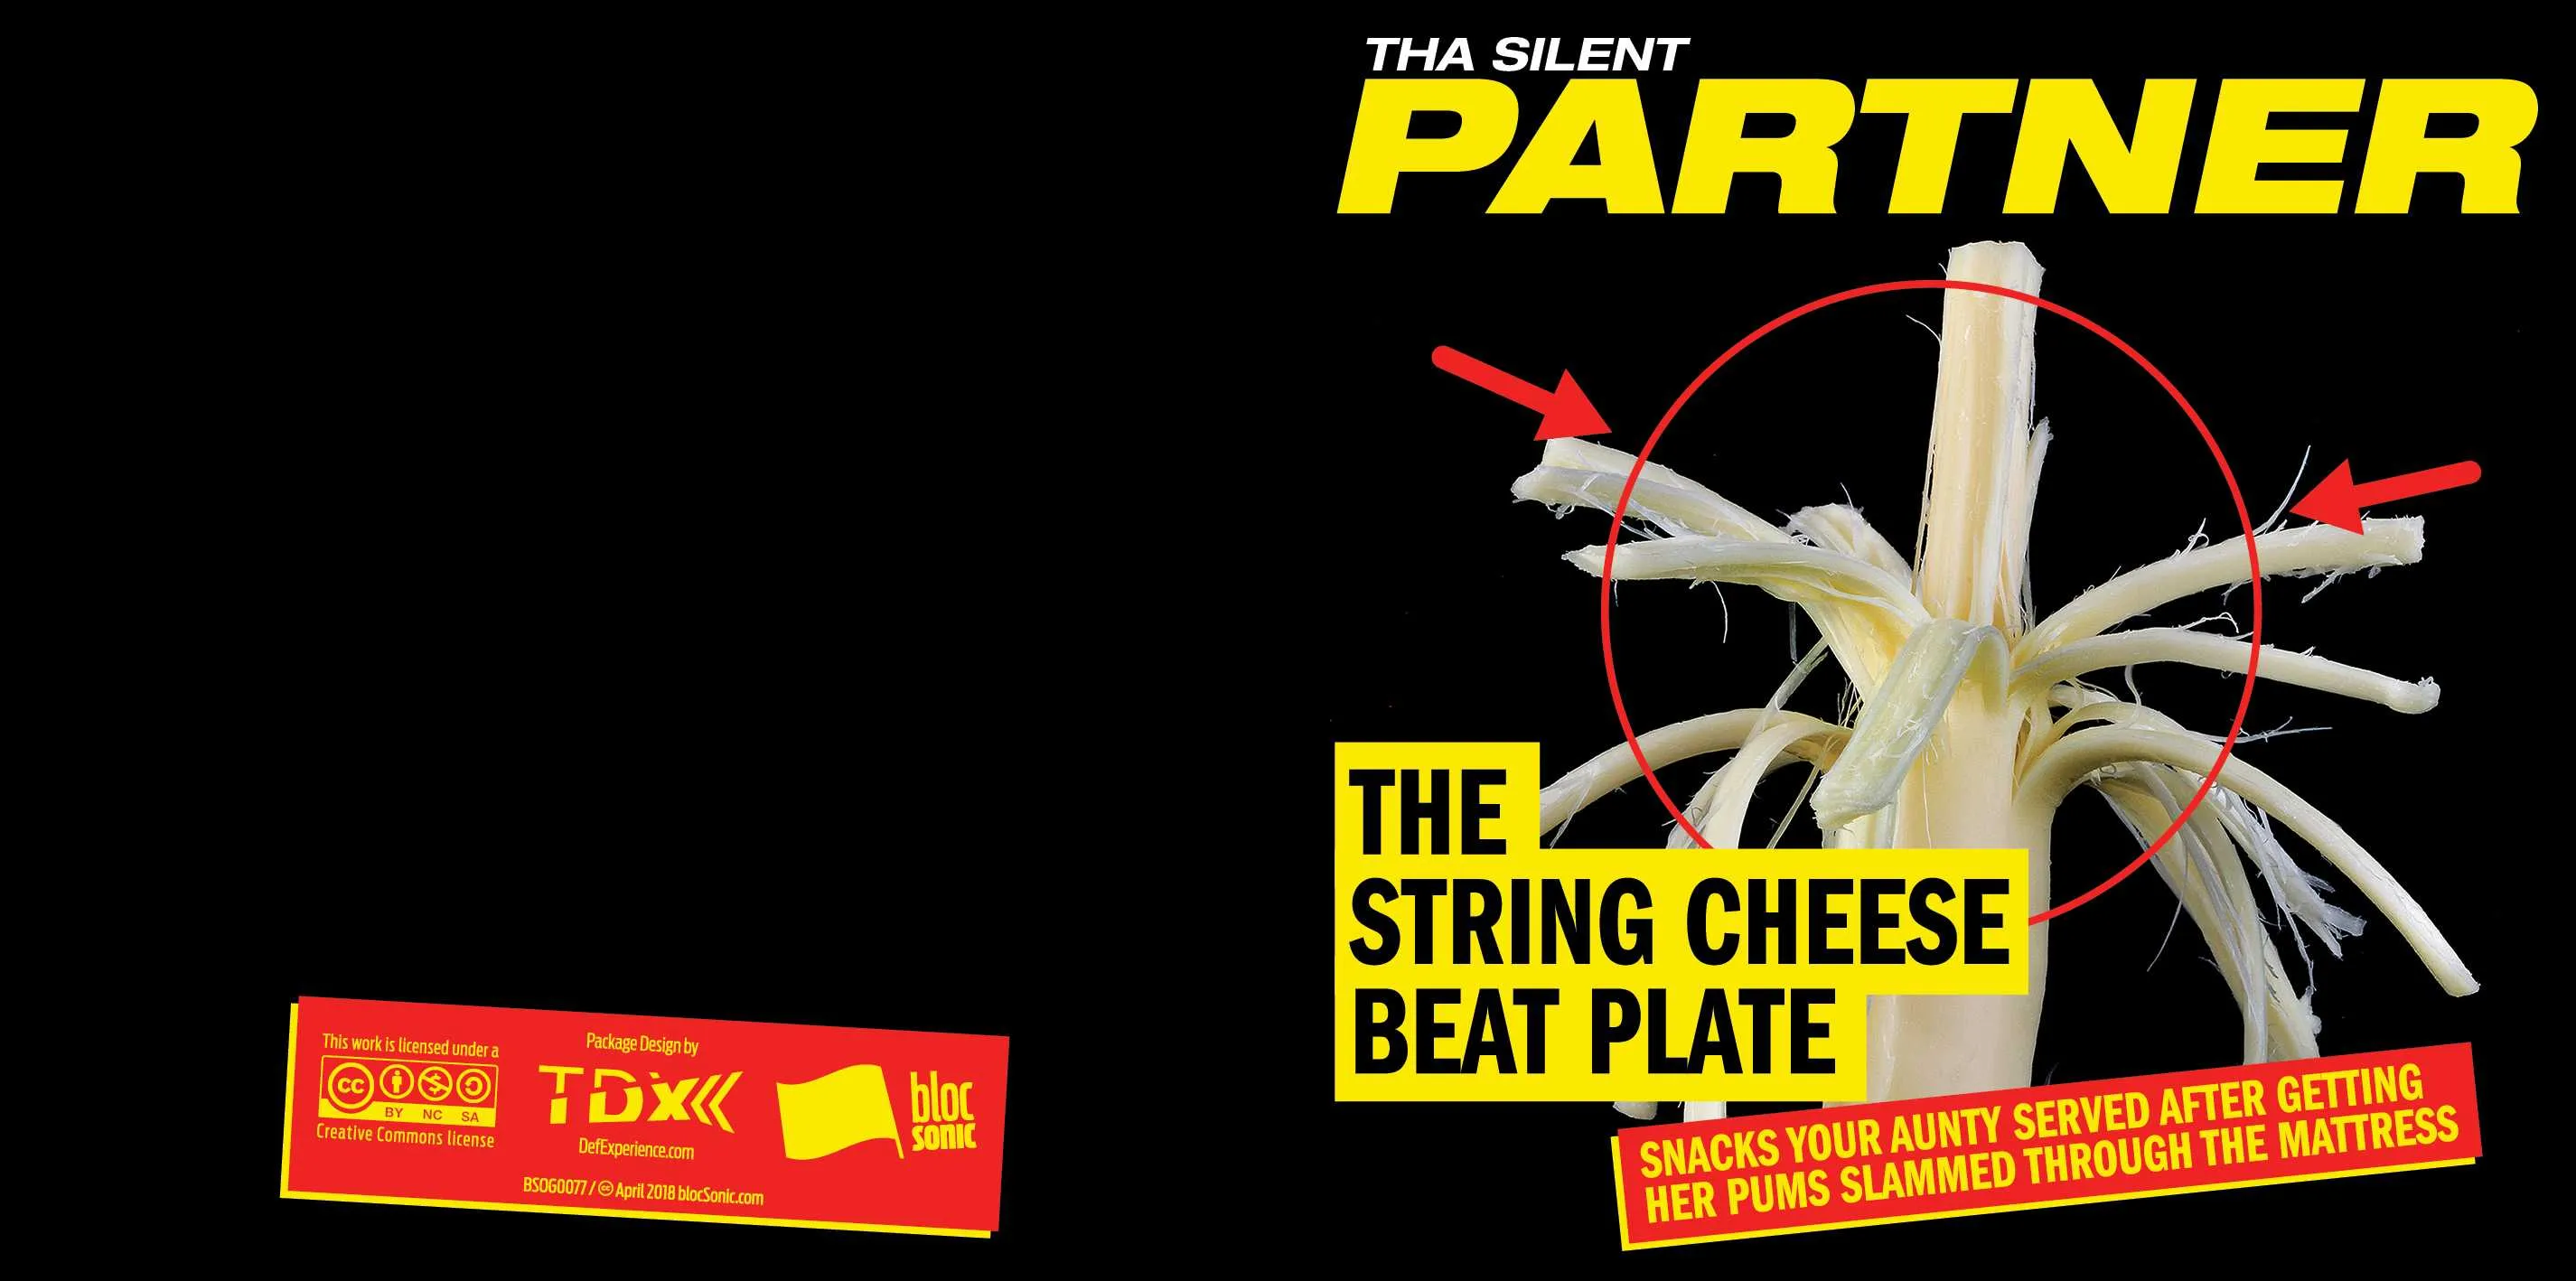 Album insert for “The String Cheese Beat Plate” by Tha Silent Partner